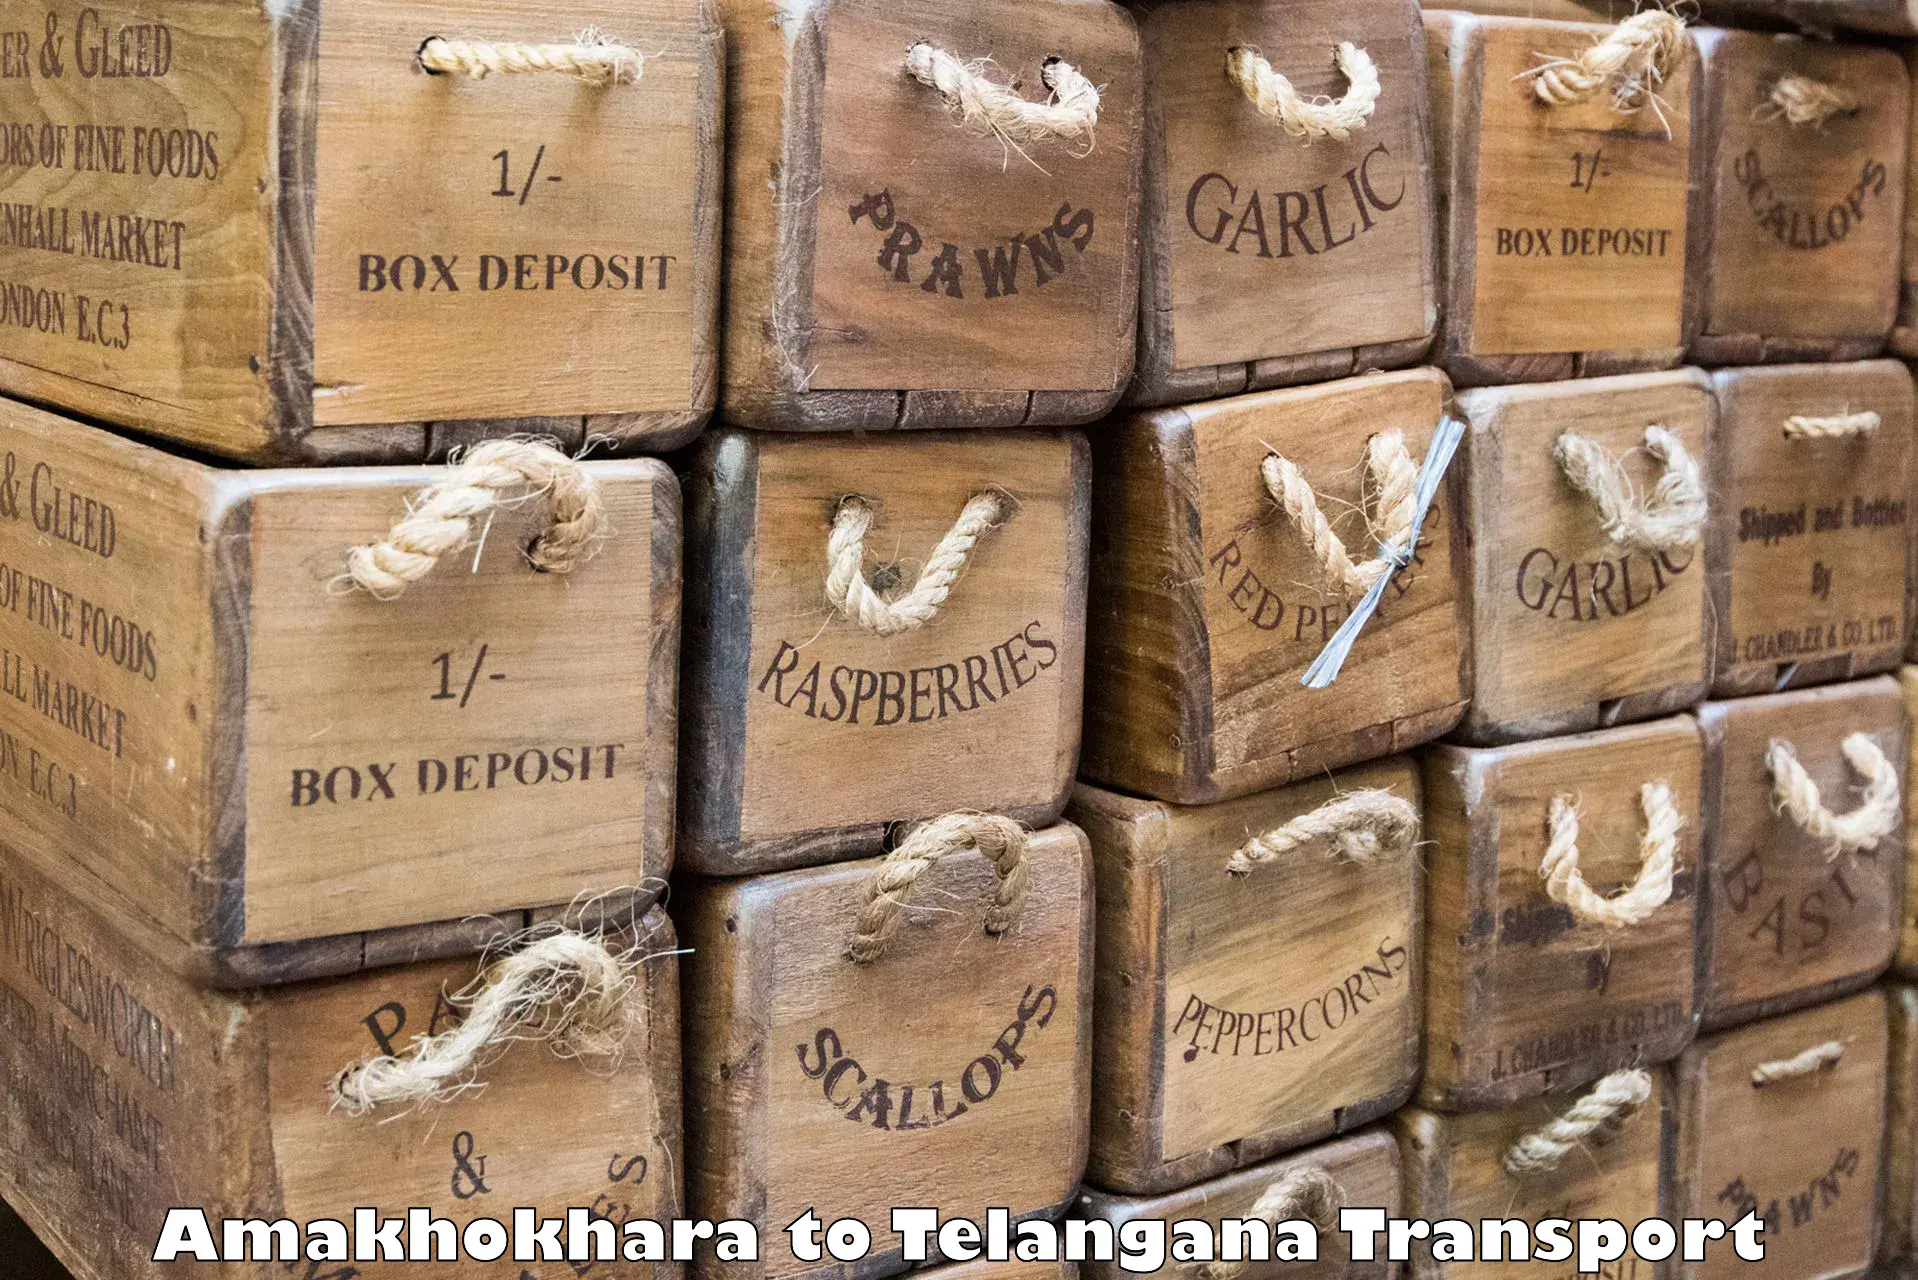 Air cargo transport services Amakhokhara to Mancherial